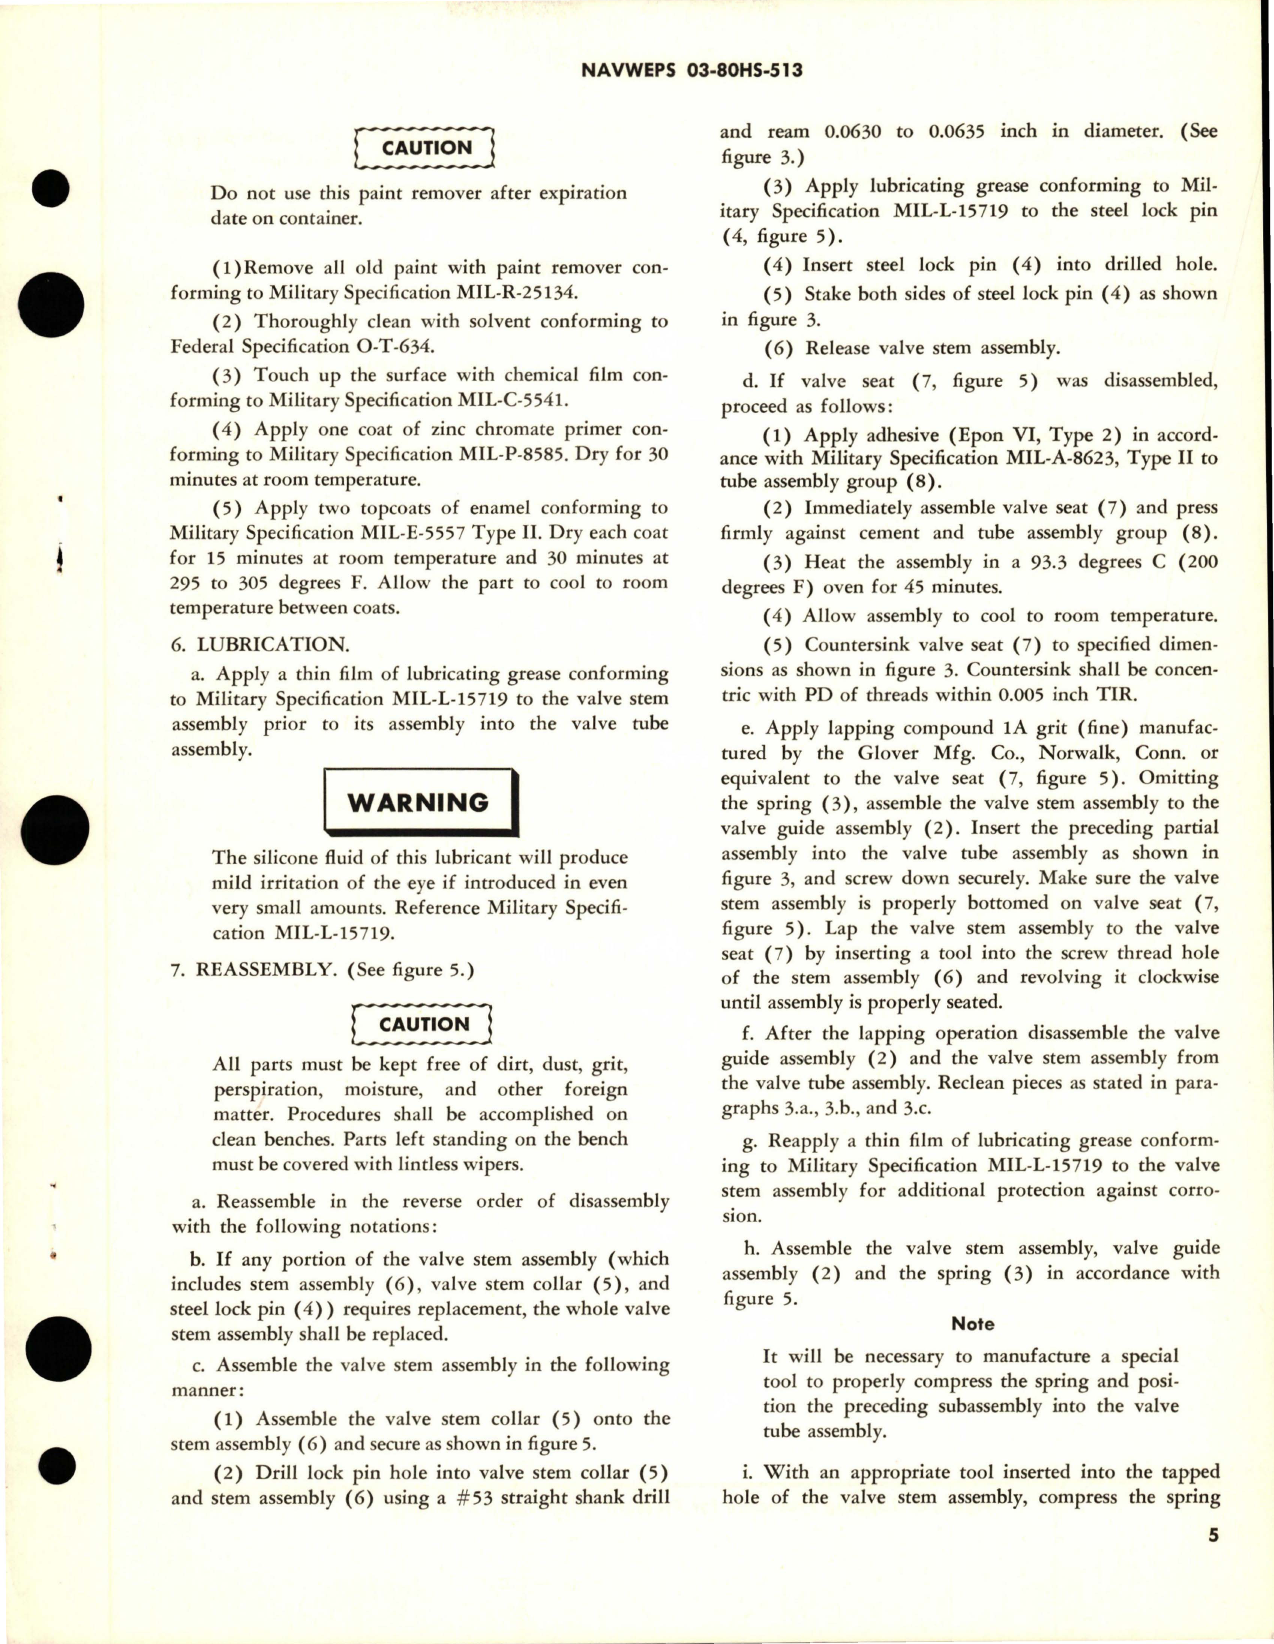 Sample page 5 from AirCorps Library document: Overhaul Instructions with Parts Breakdown for Pressure Relief Valve - Part 503163 